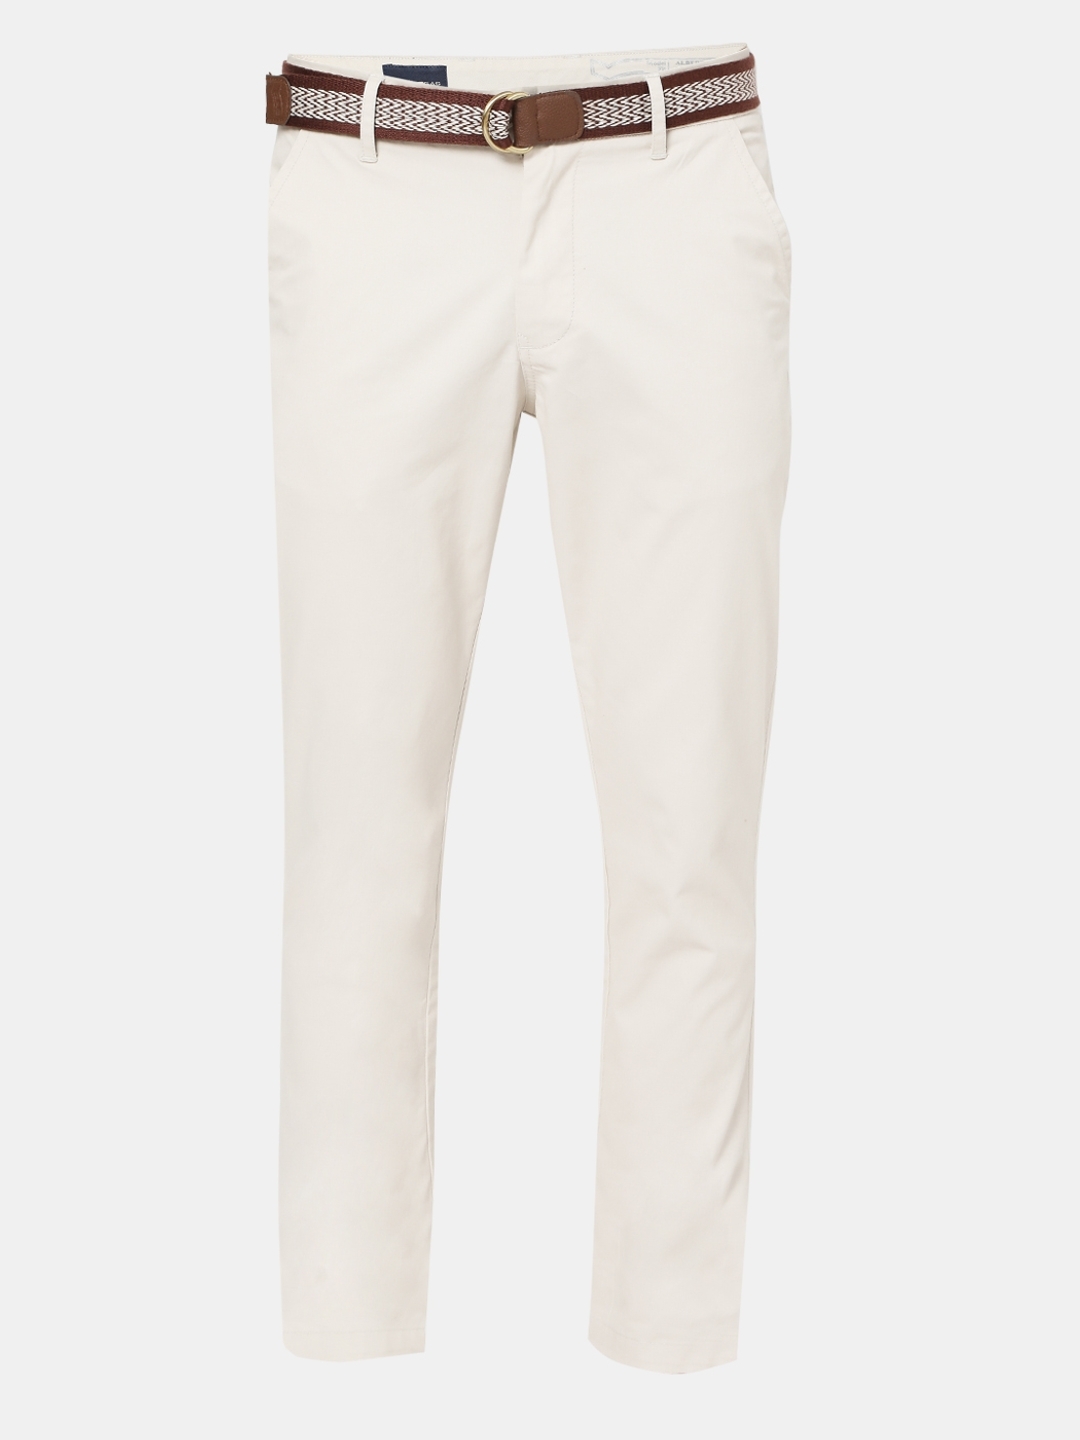 multi Multicolor Double Cloth Cotton Trouser , Chinos for Men, Size: 28 To  .34 at Rs 300/piece in New Delhi